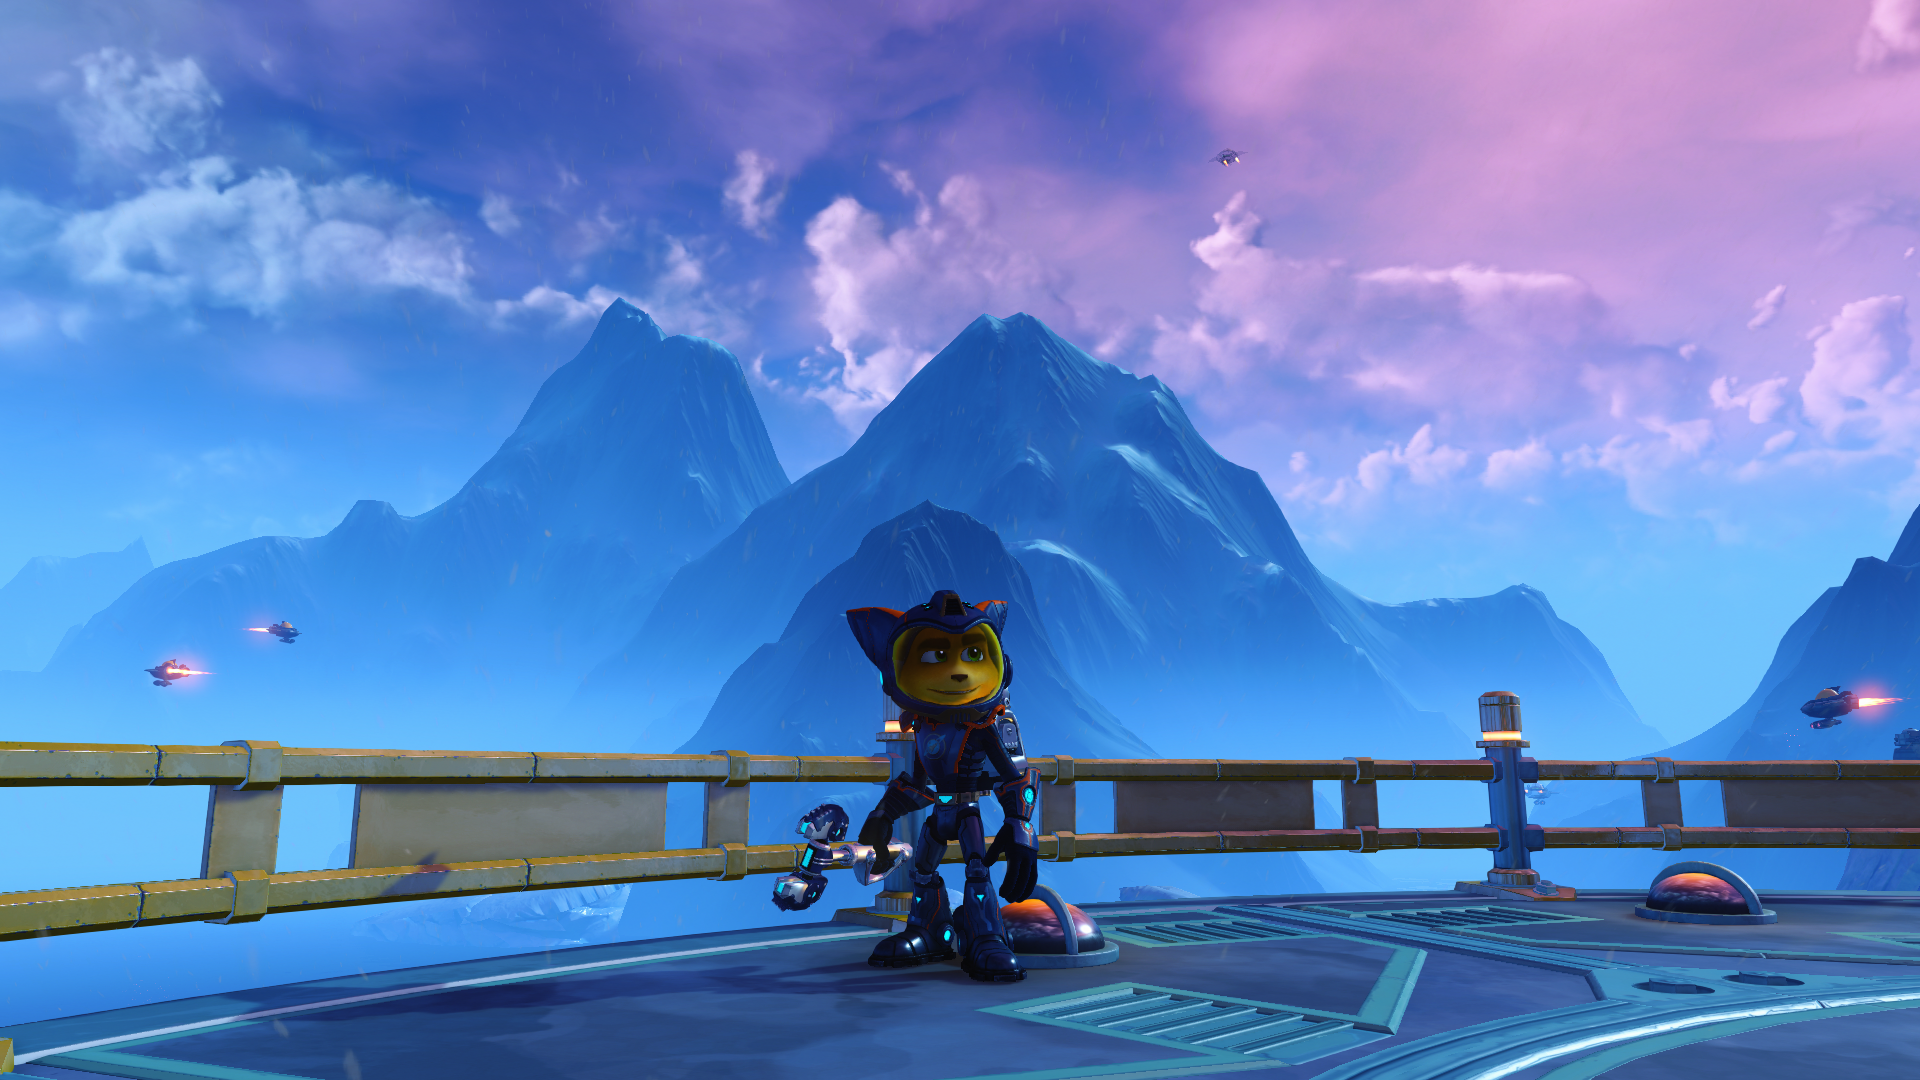 Ratchet & Clank (PS4) - Demo Gameplay @ 1440p HD ✓ 